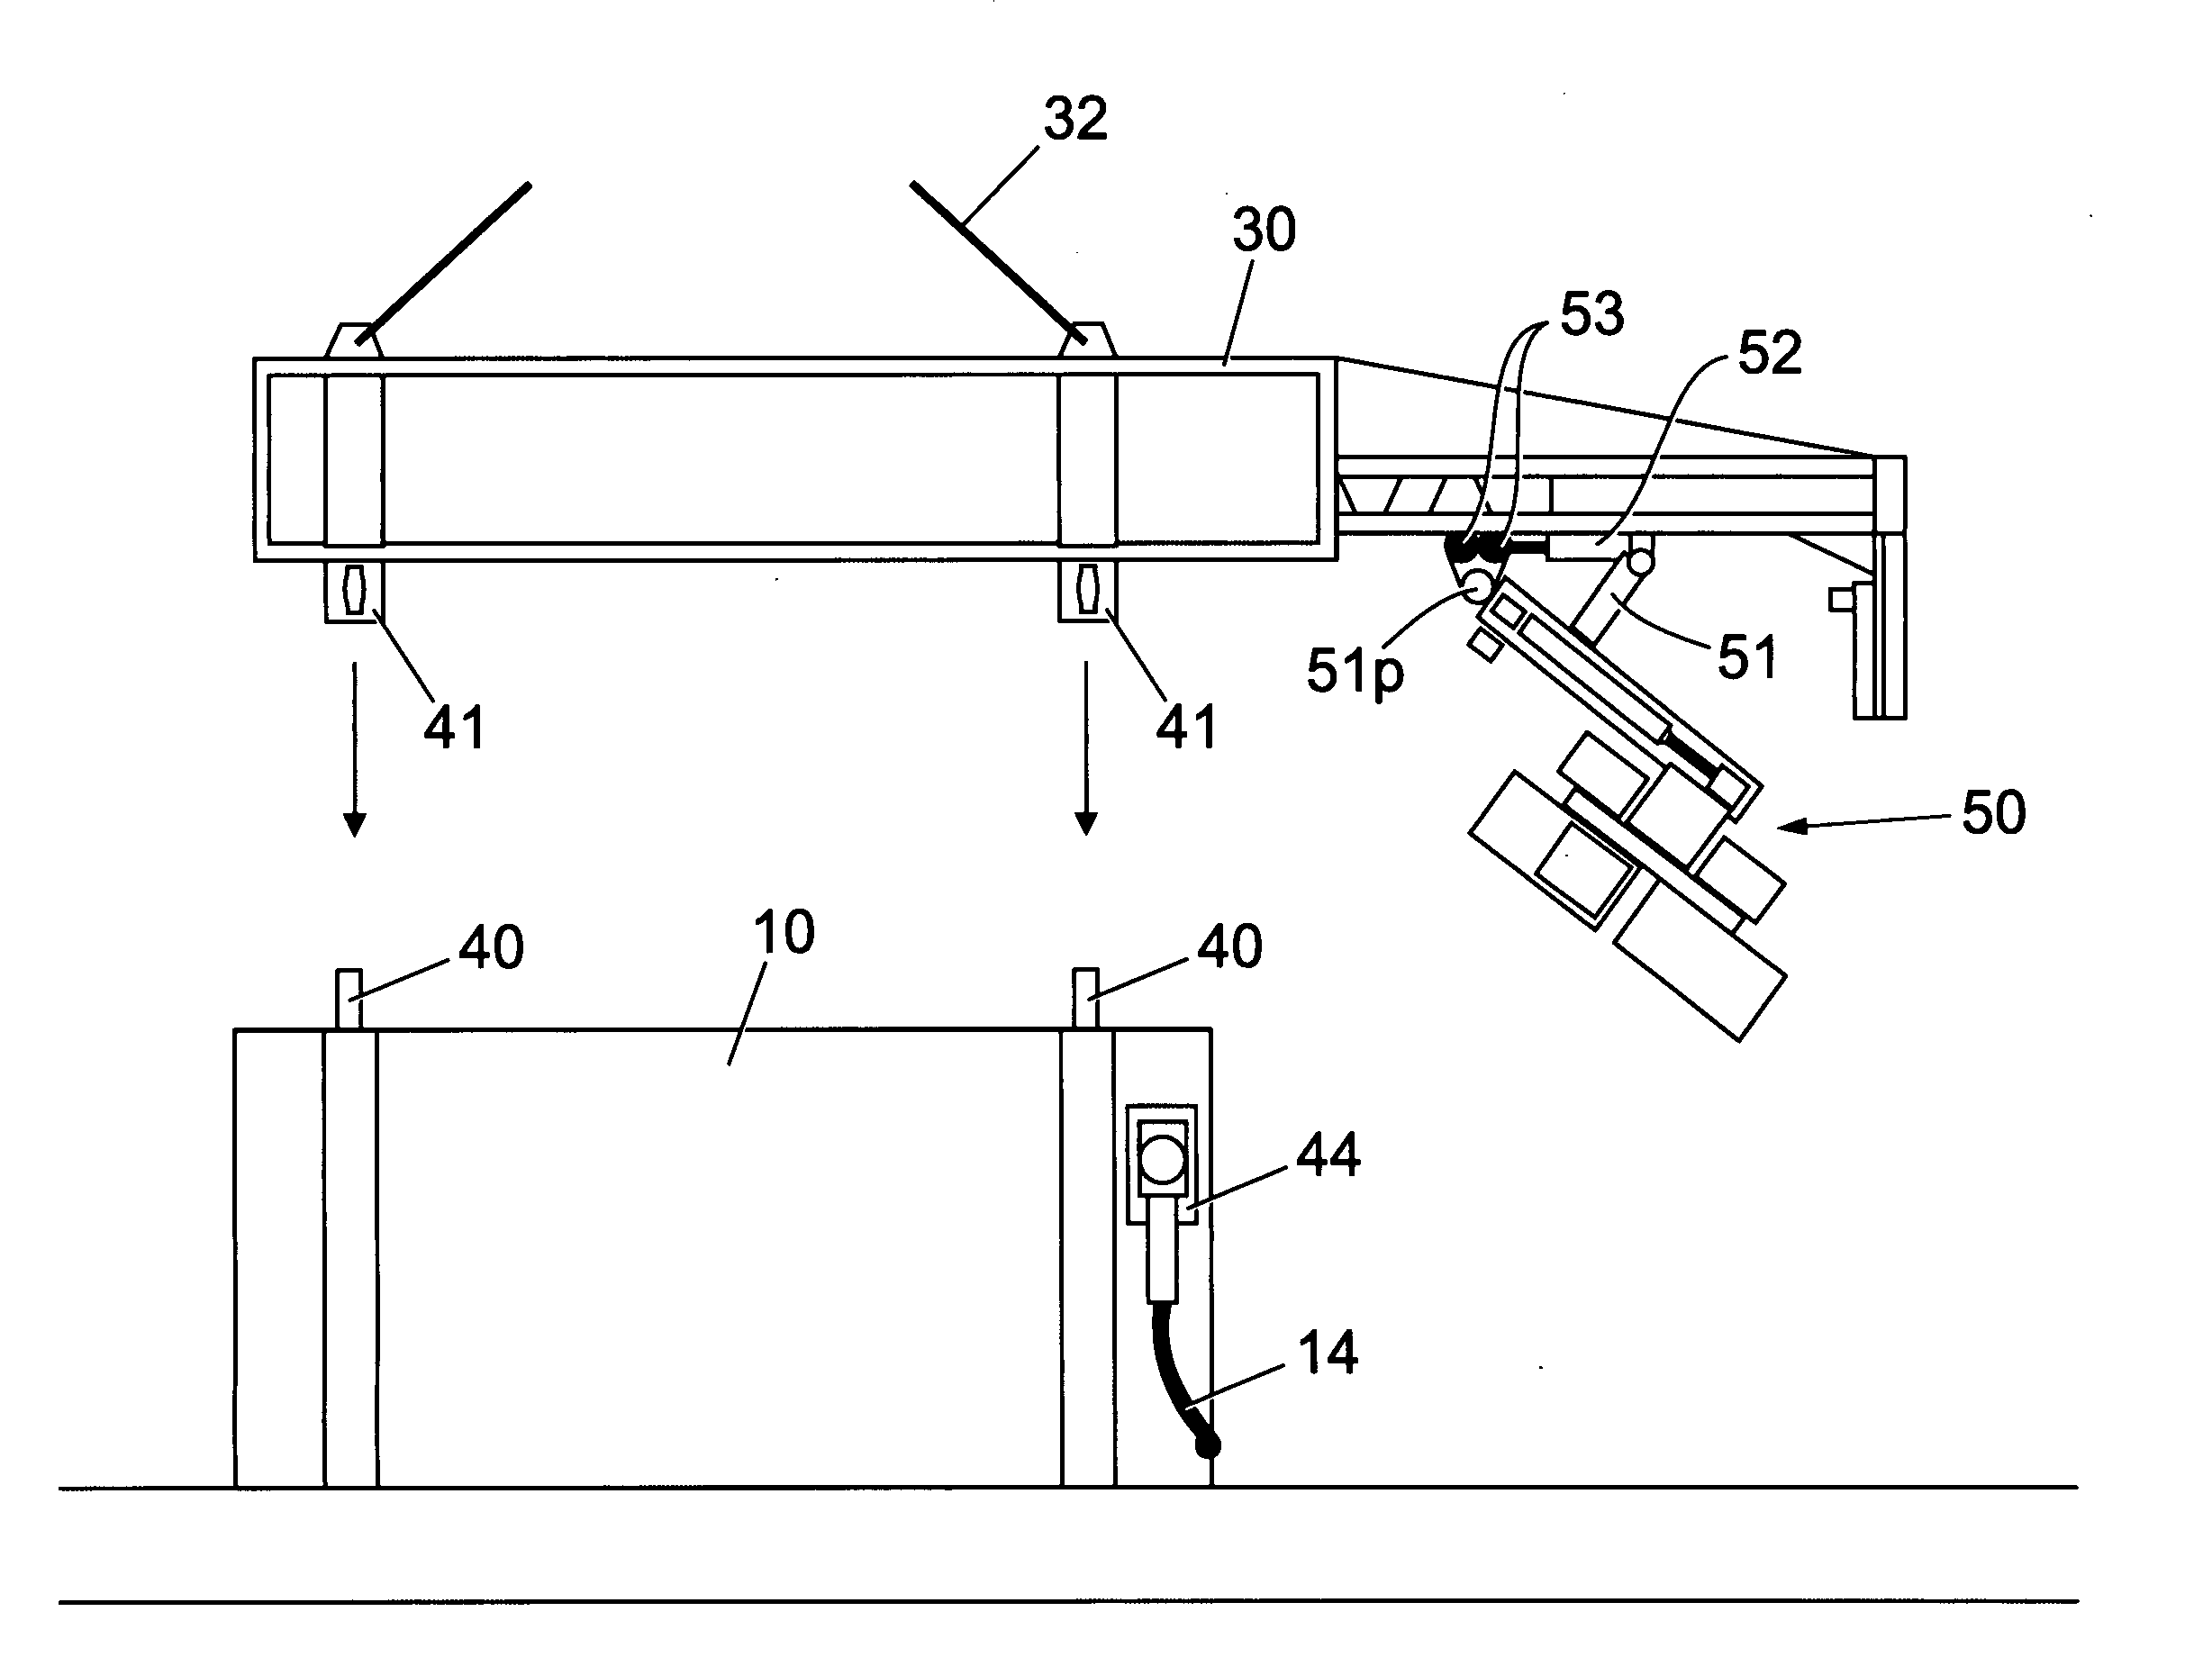 Method and apparatus